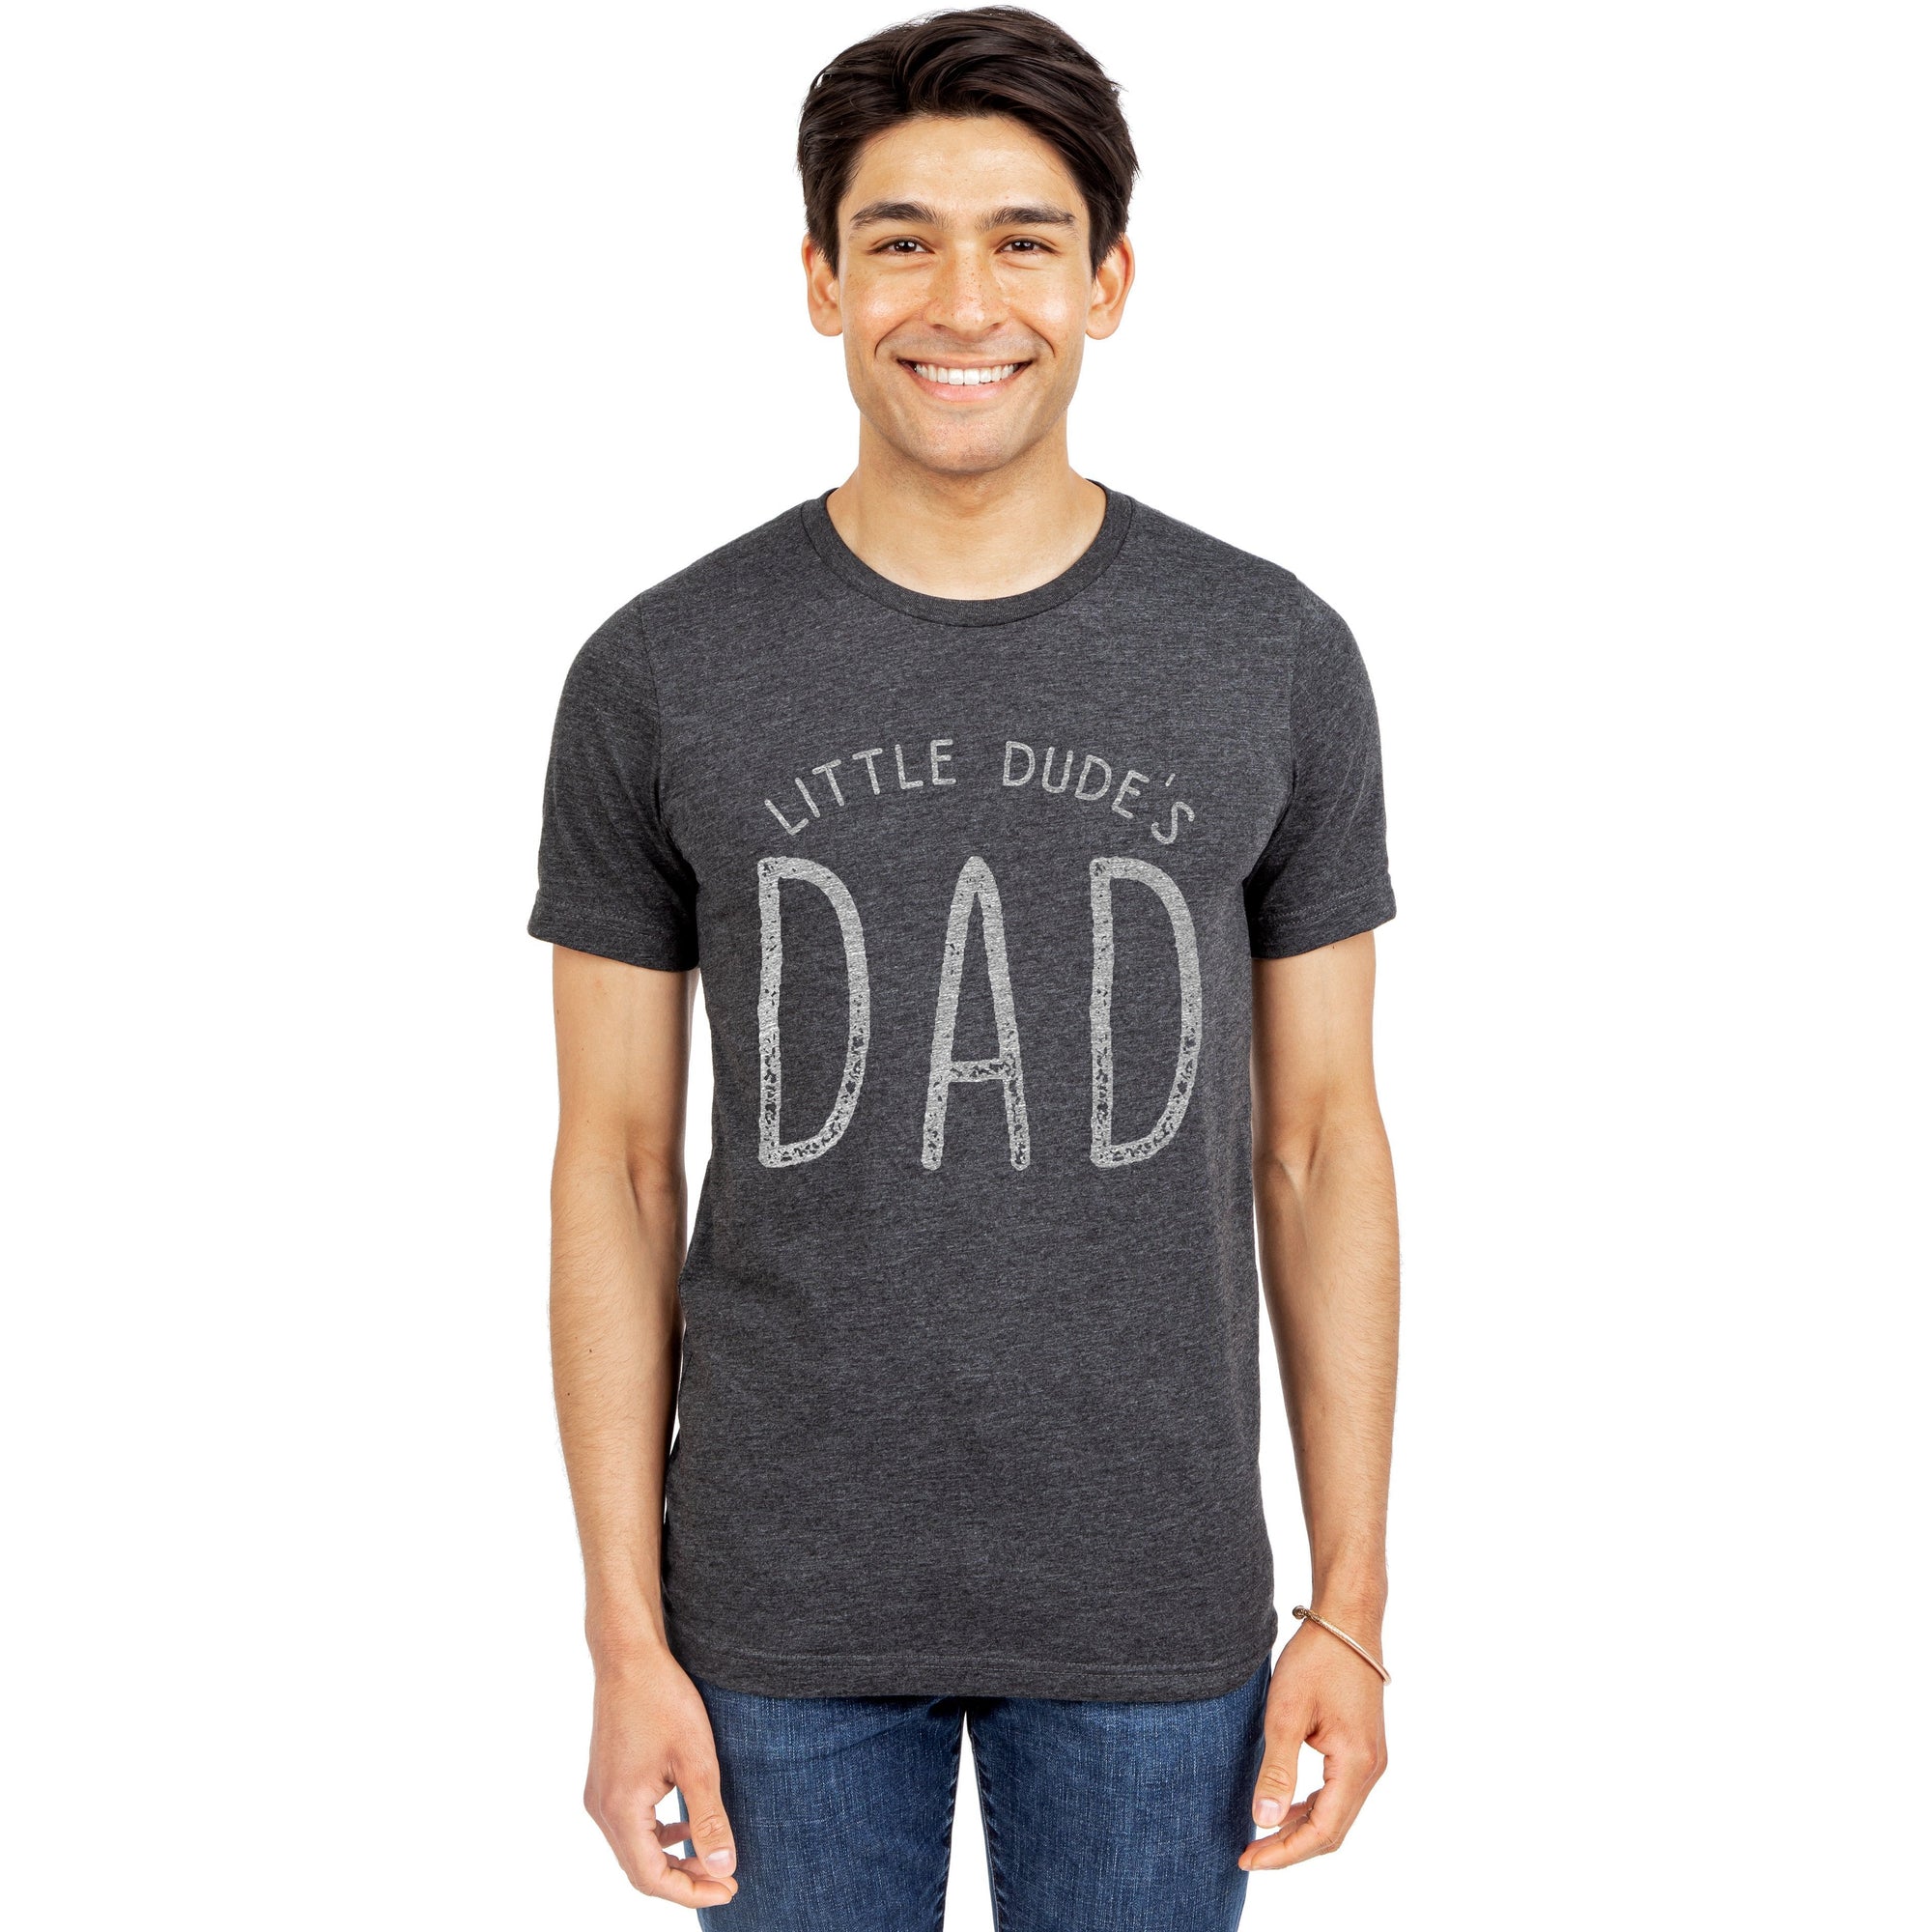 Lil Dude's Dad Charcoal Printed Graphic Men's Crew T-Shirt Tee Model